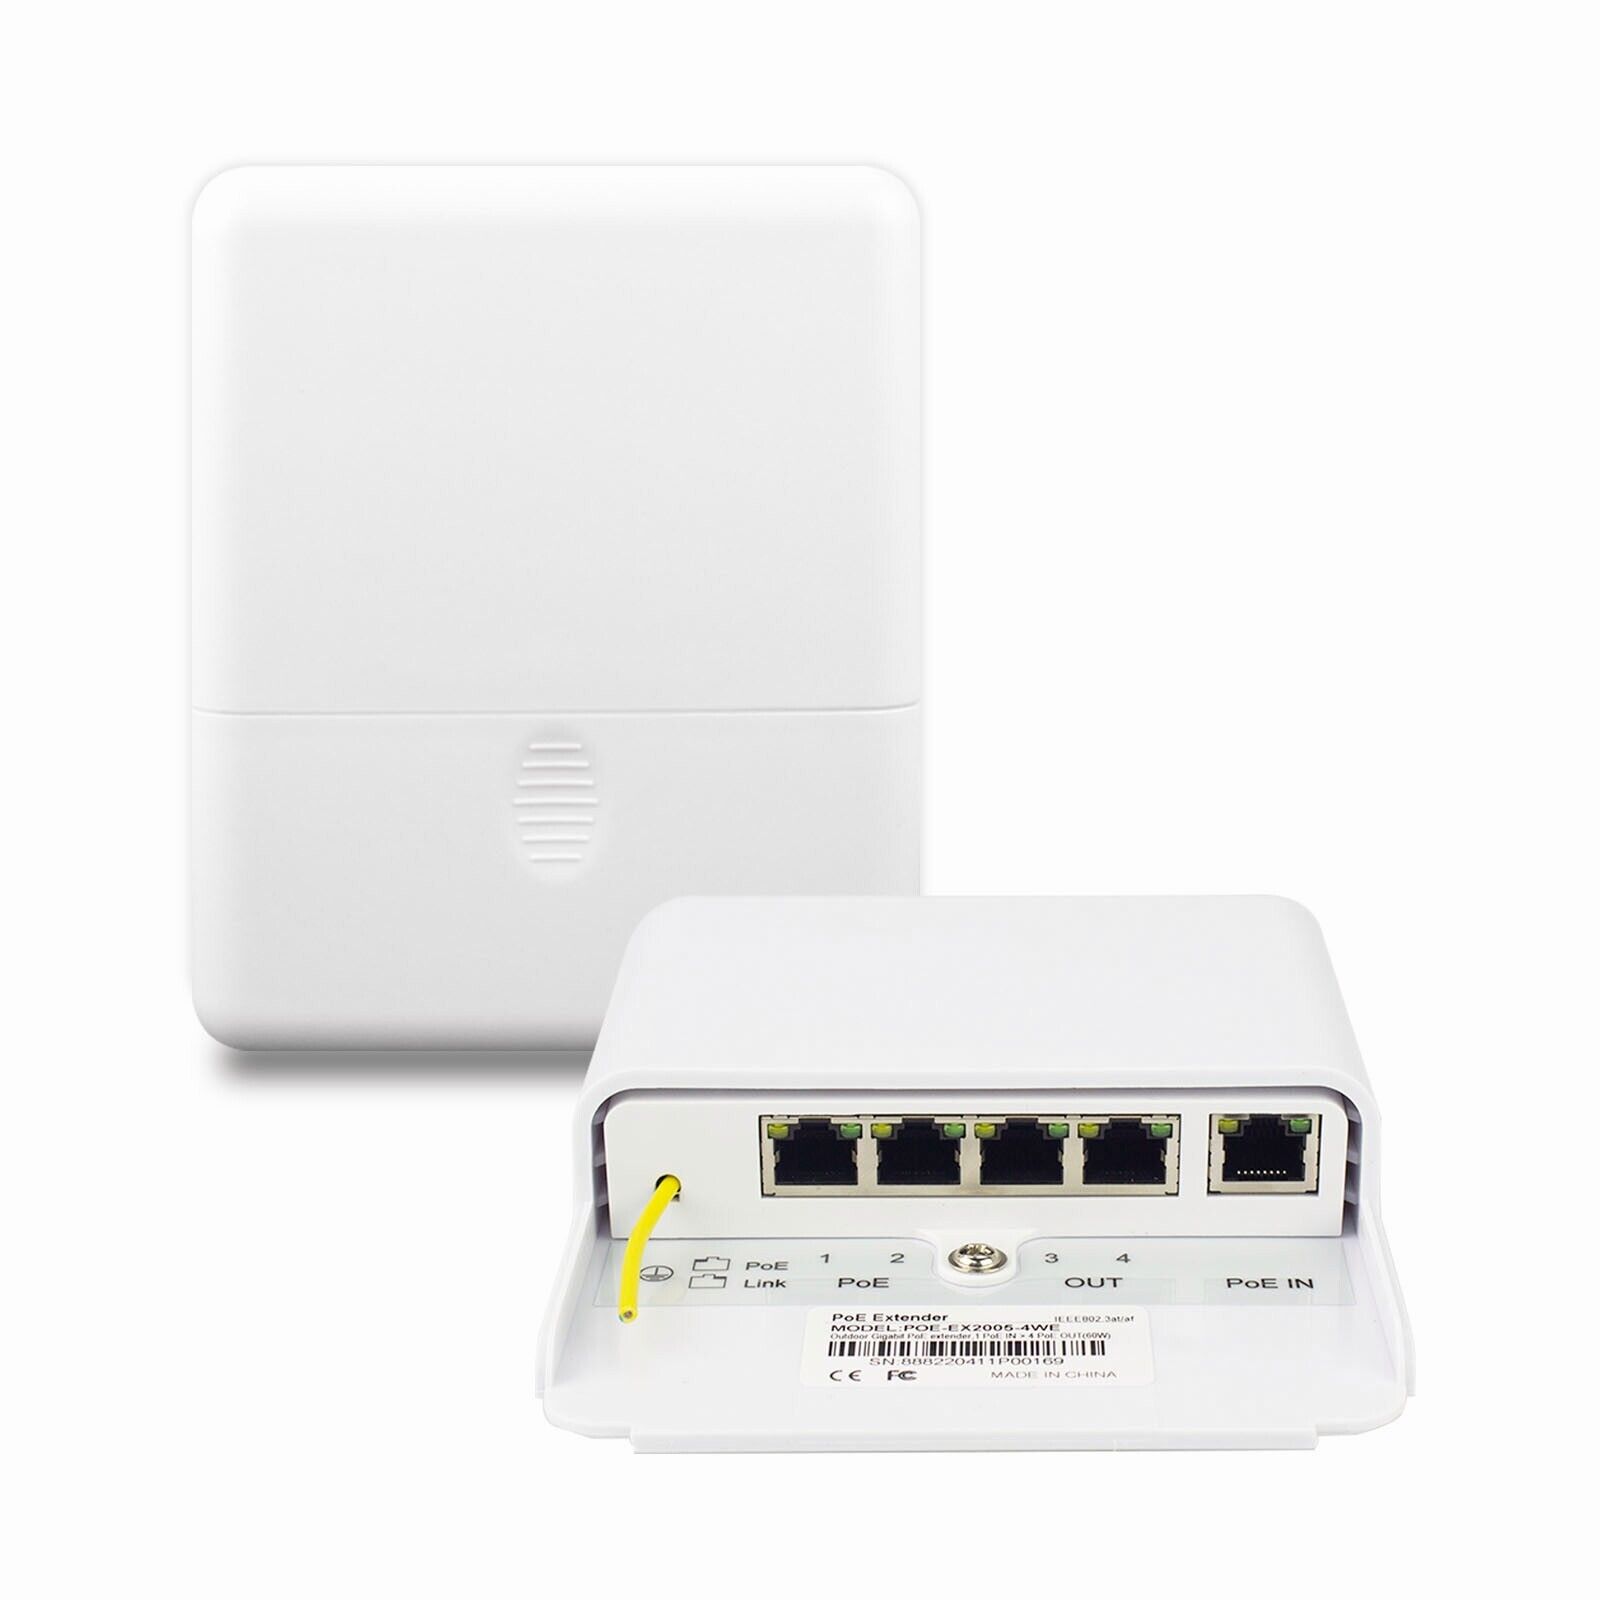 5 Port Gigabit PoE Passthrough Switch Outdoor Ethernet Extender Up to 100m/328ft